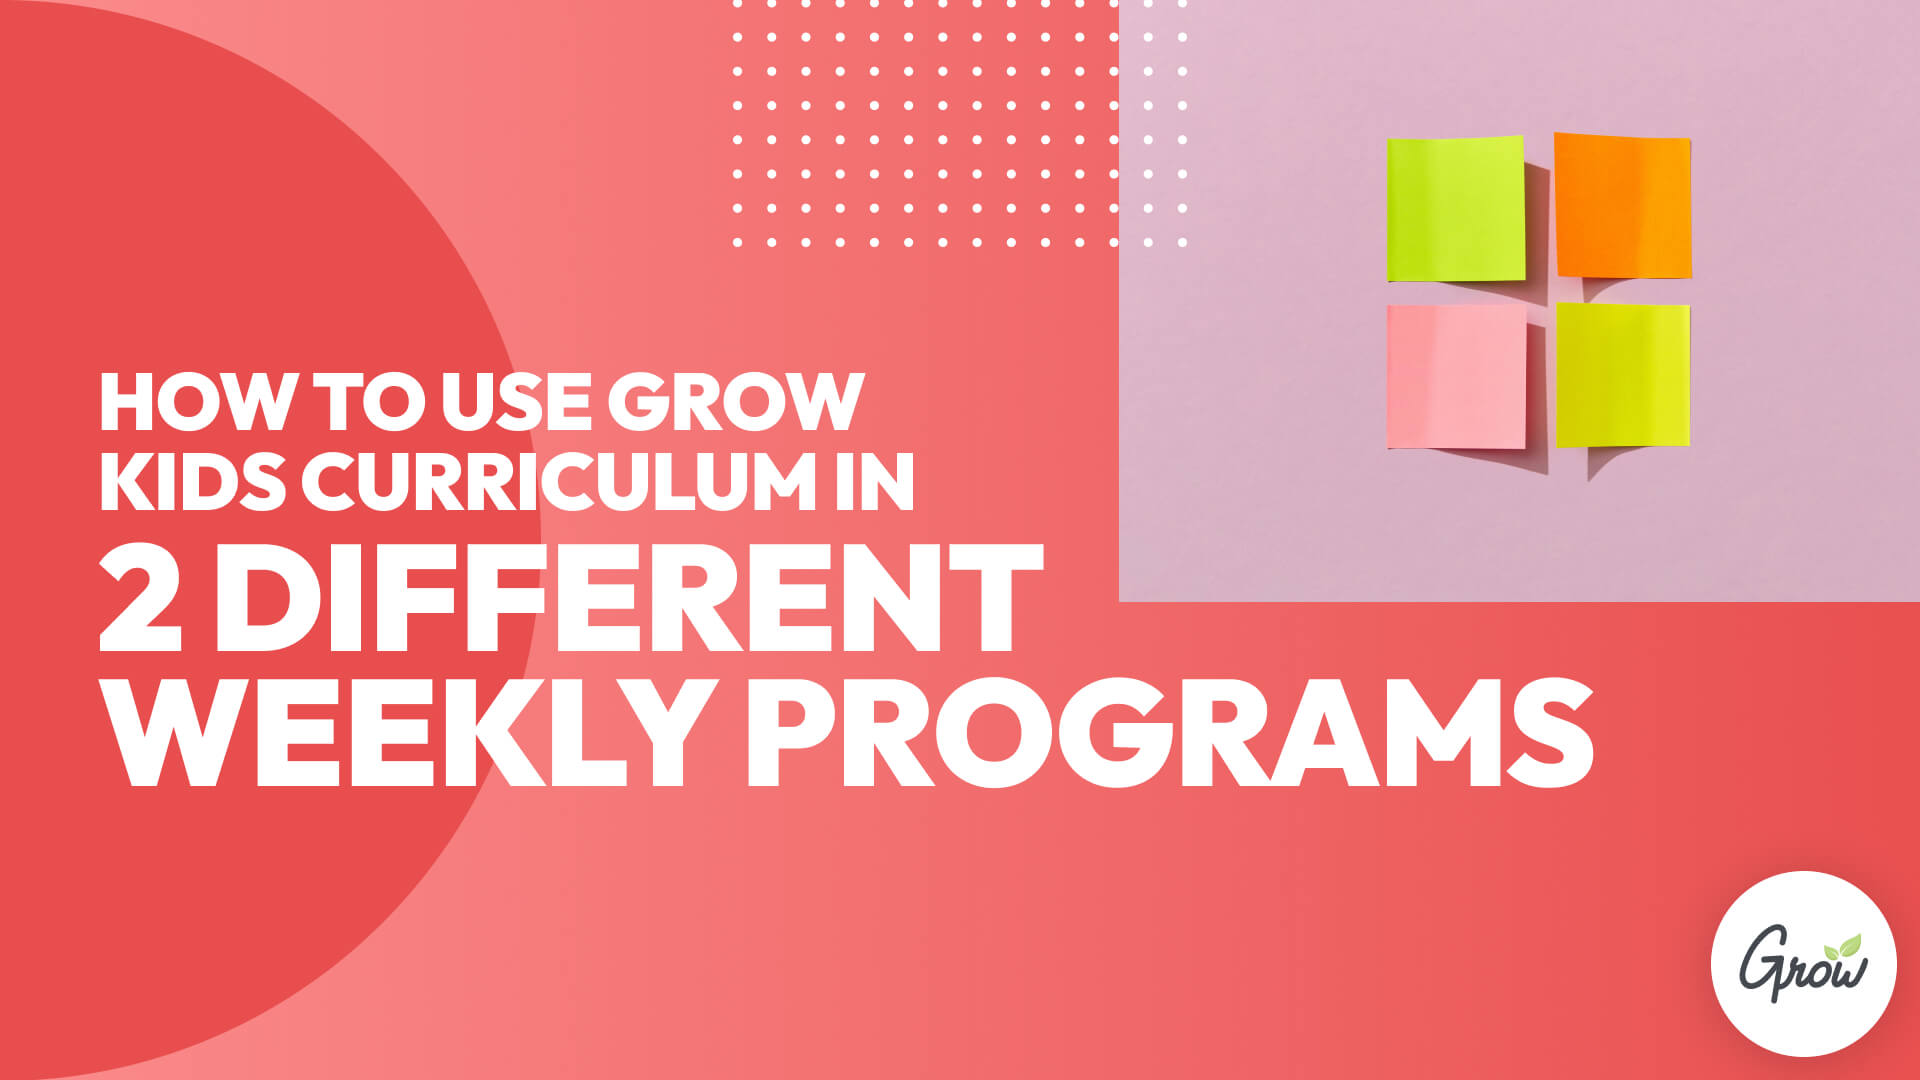 How to Use Grow Kids Curriculum in 2 Different Weekly Programs